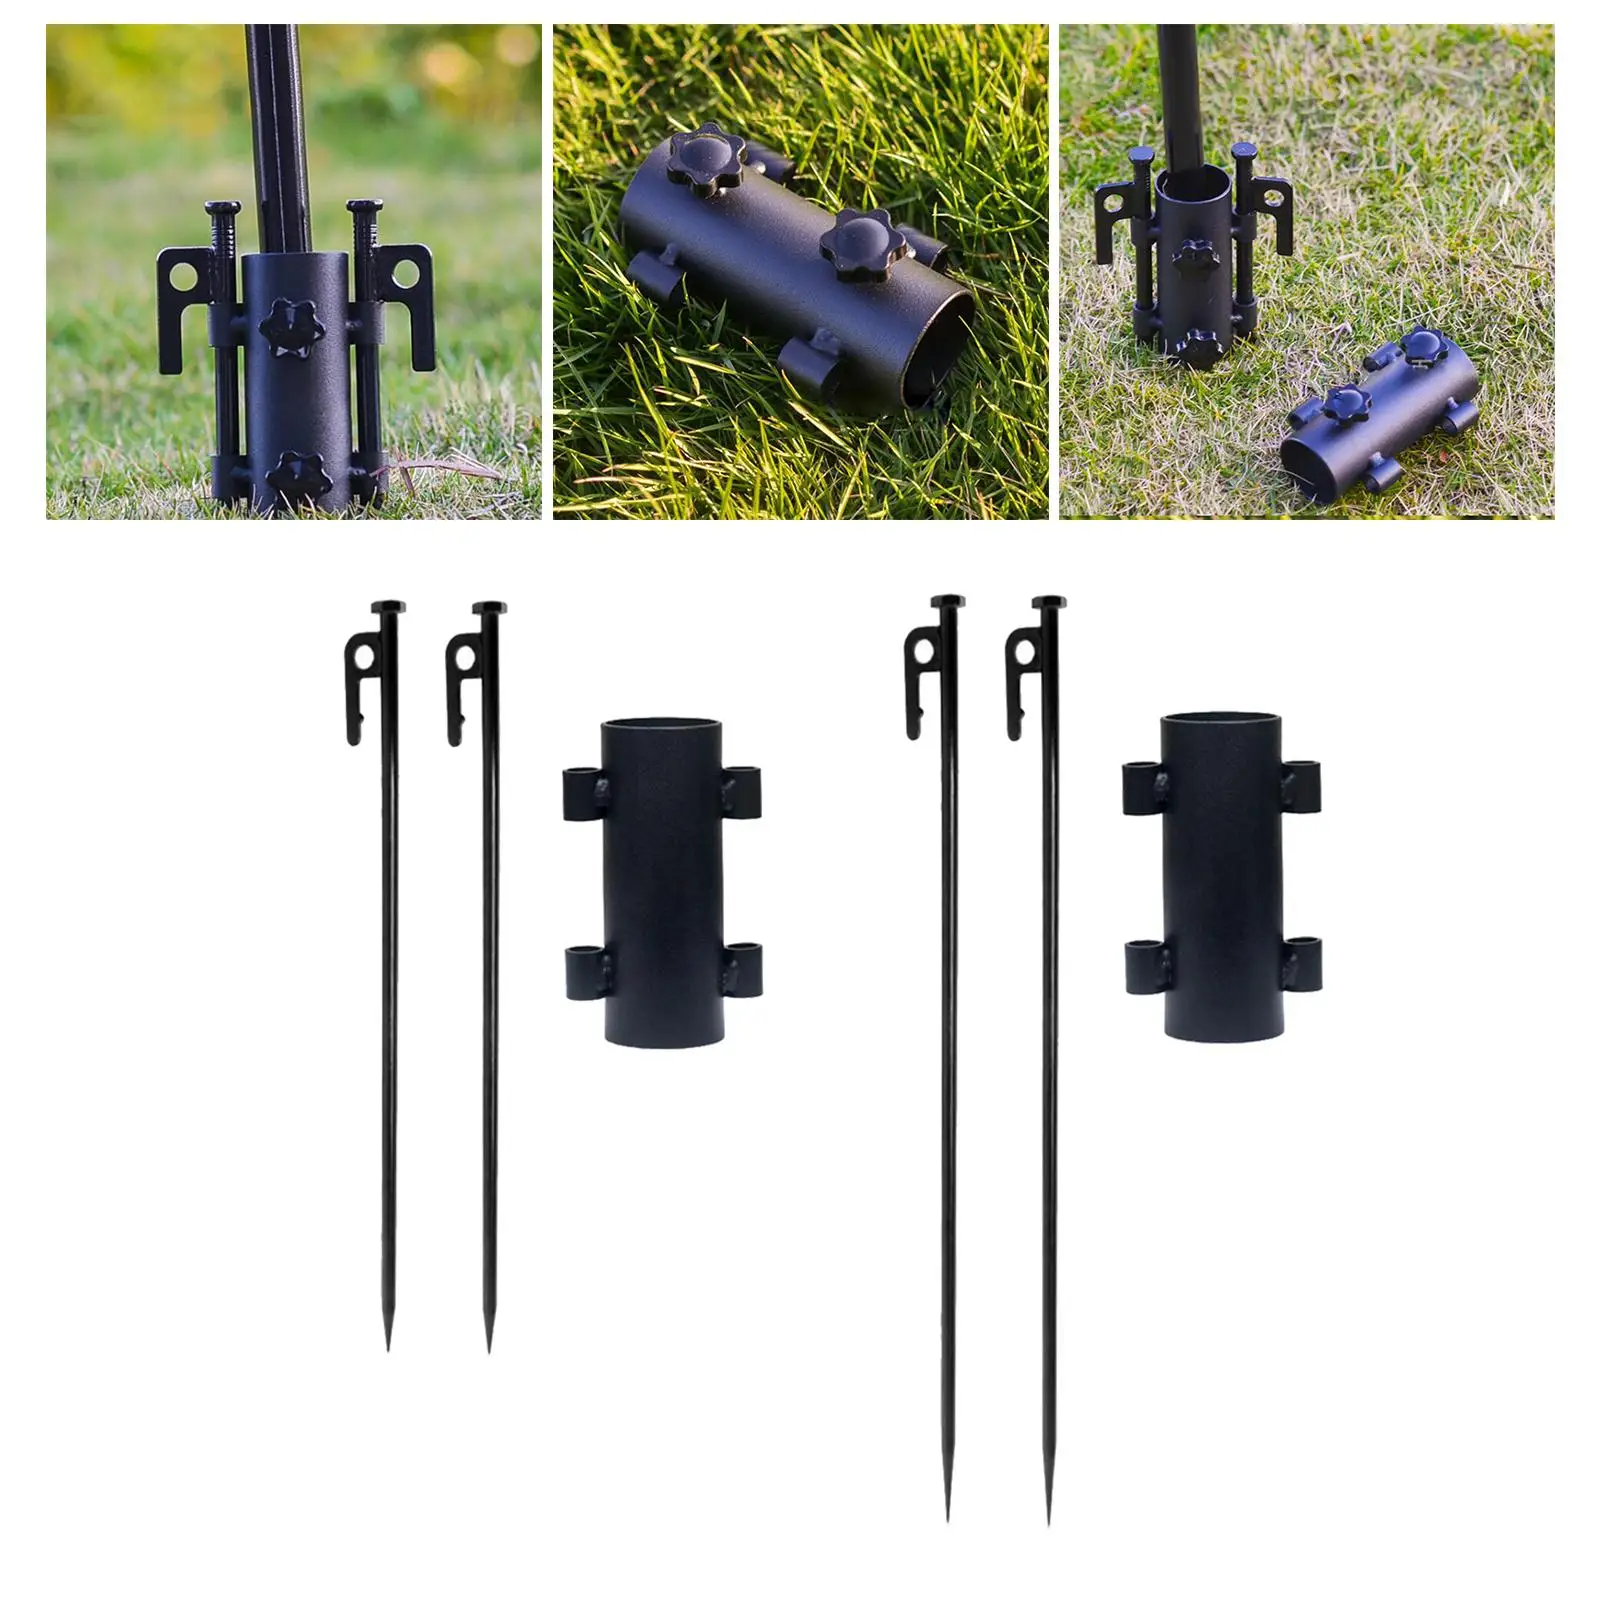 Portable Awning Rod Holder Reinforced Metal Windproof Fixed Tube Canopy Poles